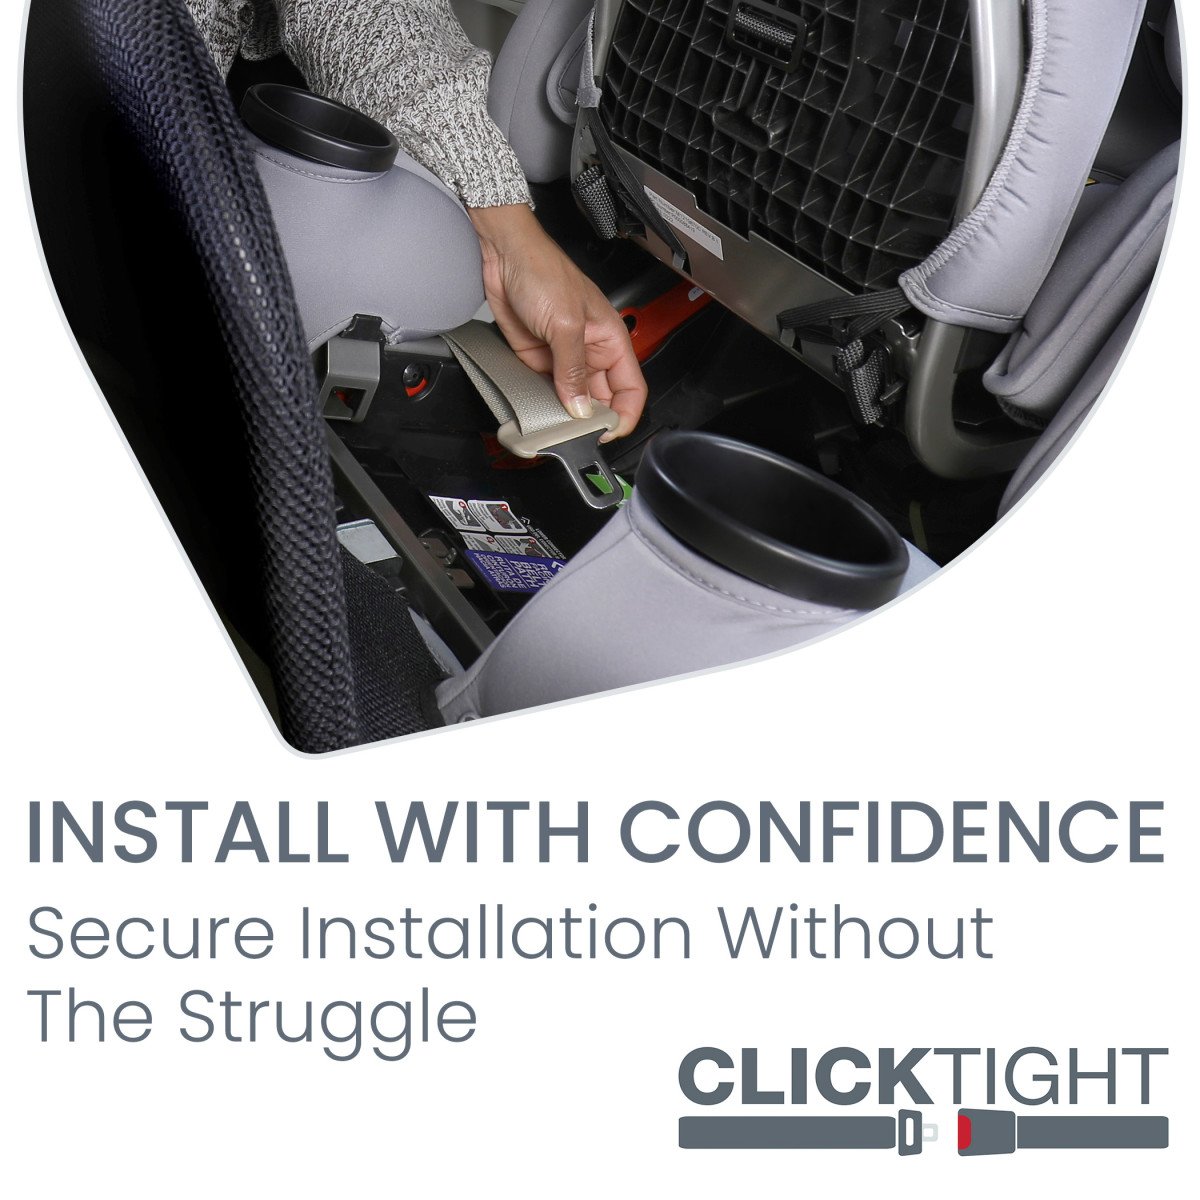 ClickTight Installation - Secure Installation Without the Struggle (Copy)